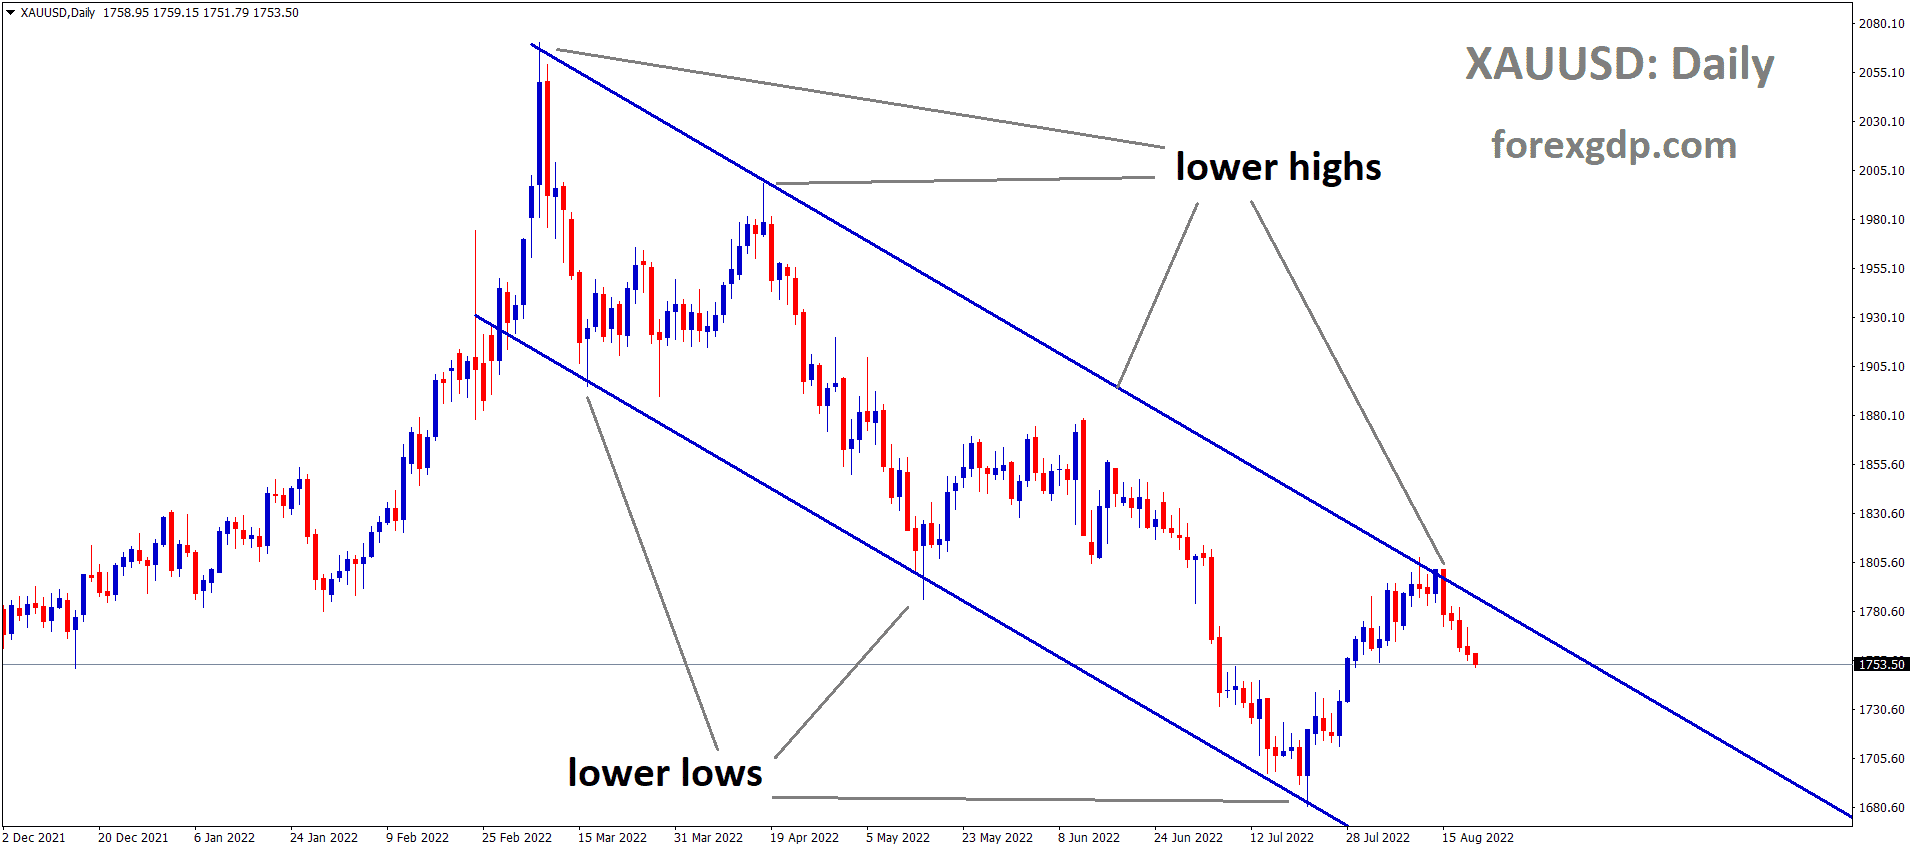 XAUUSD Gold price is moving in the Descending channel and the market has fallen from the lower high area of the channel 2